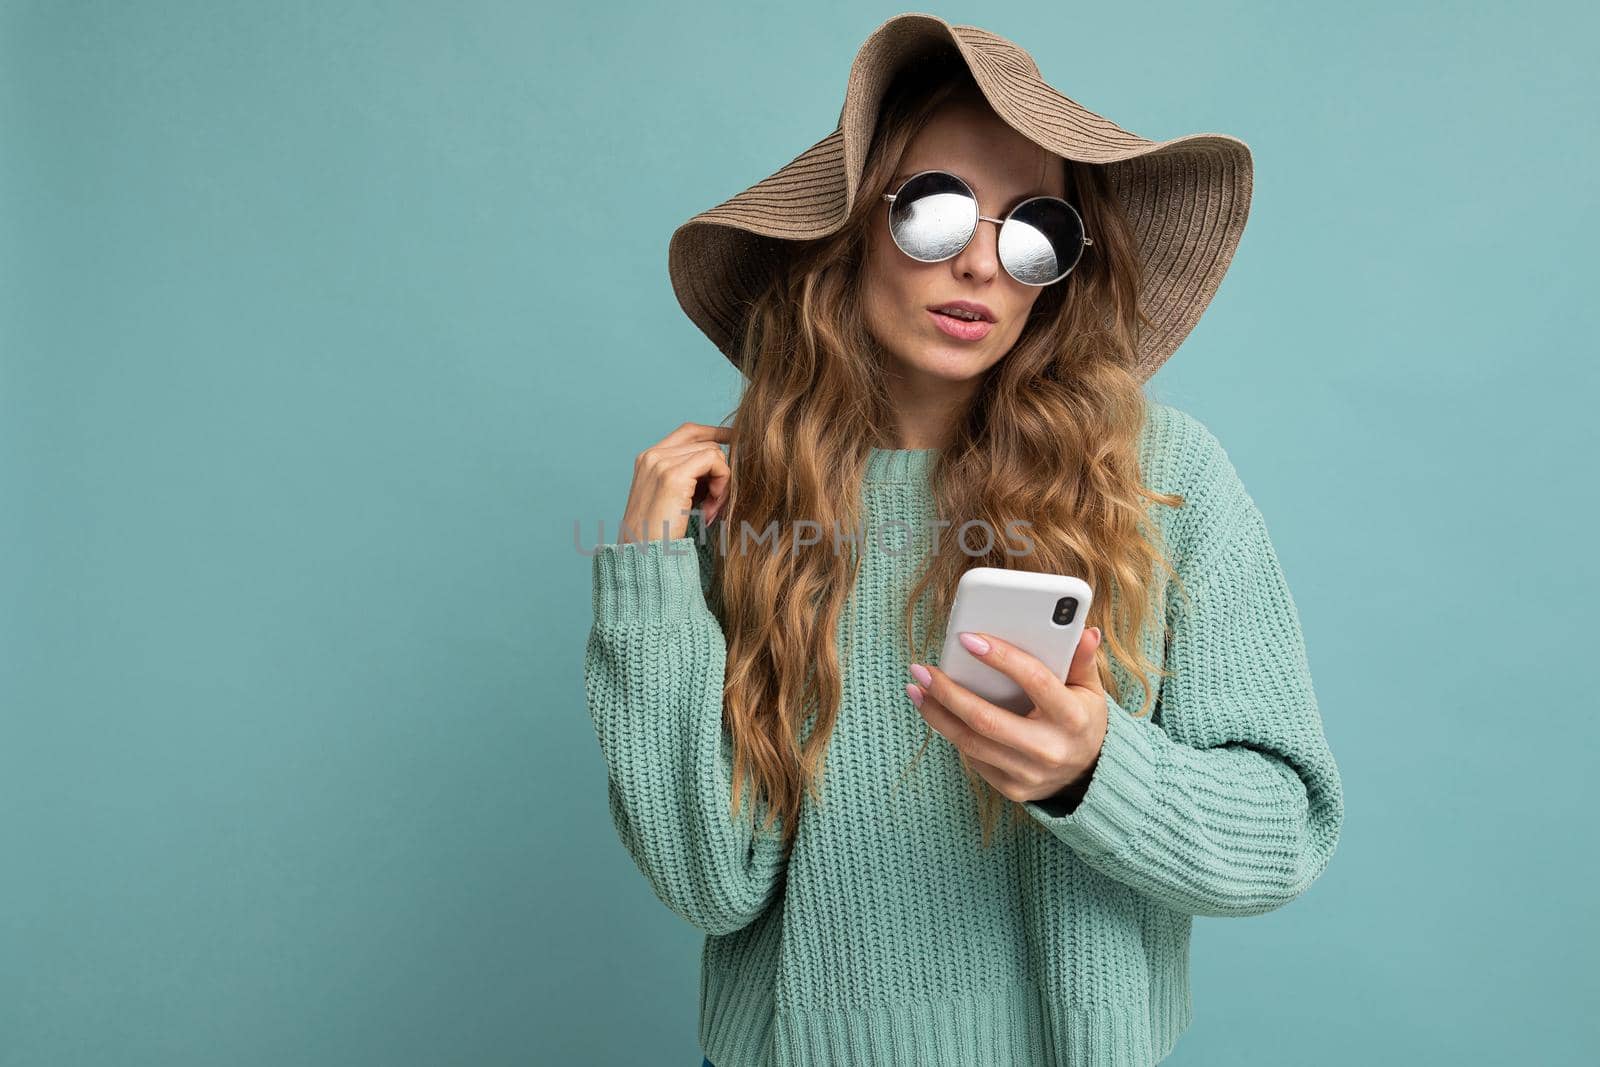 girl in a hat and sunglasses on a blue background with a phone in her hands by TRMK